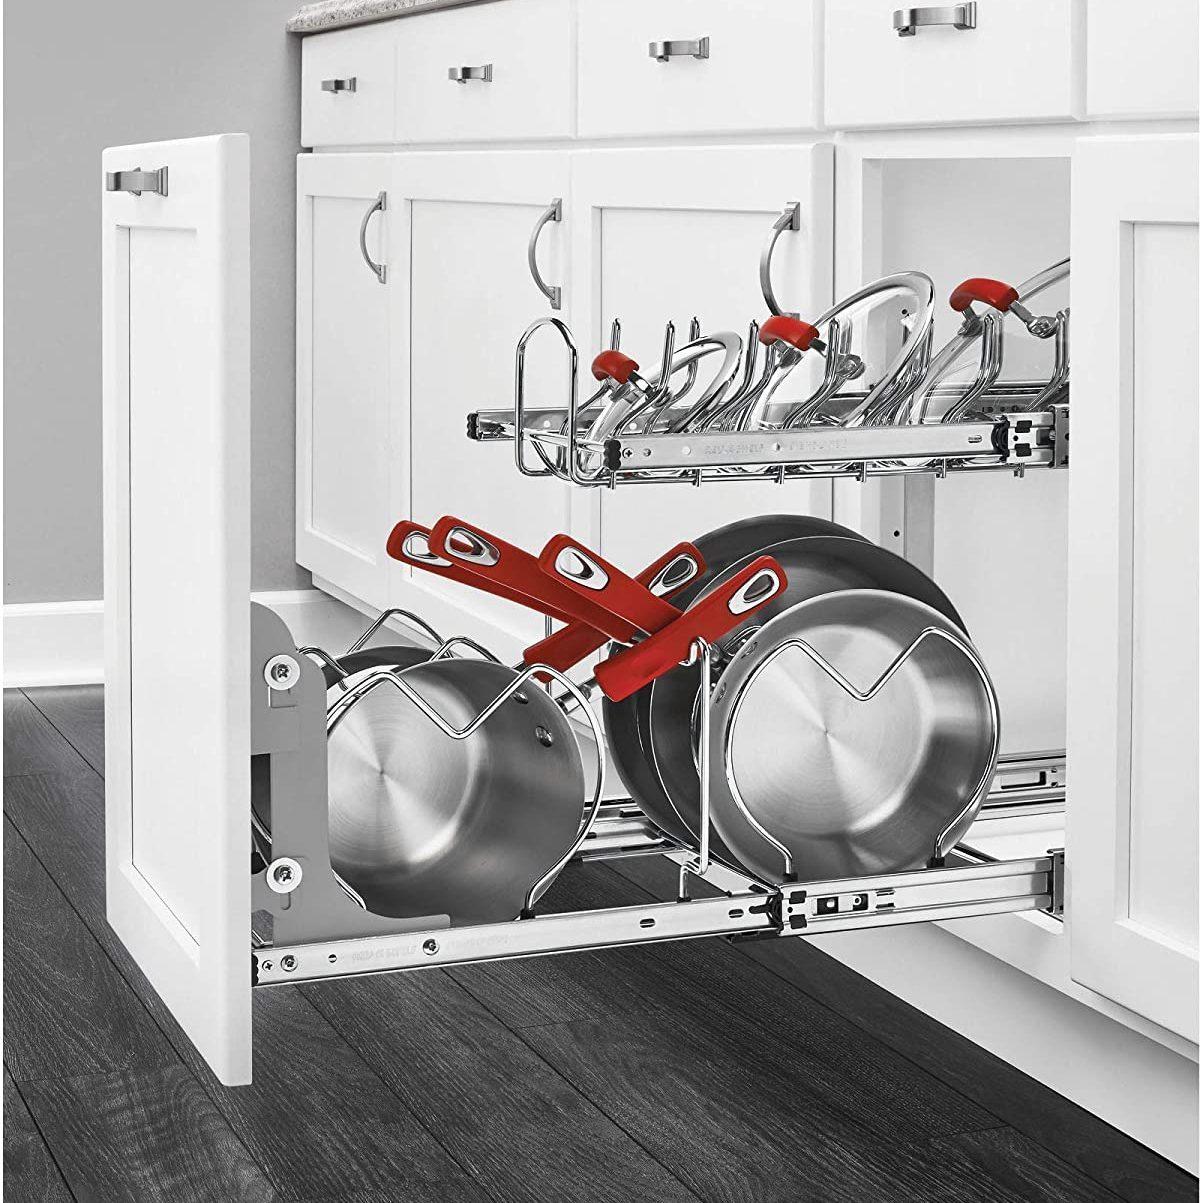 HAUSHOF haushof pots and pans organizer, 16 150lbs heavy duty pot holders  for kitchen, 6-tier adjustable pan rack under cabinet with